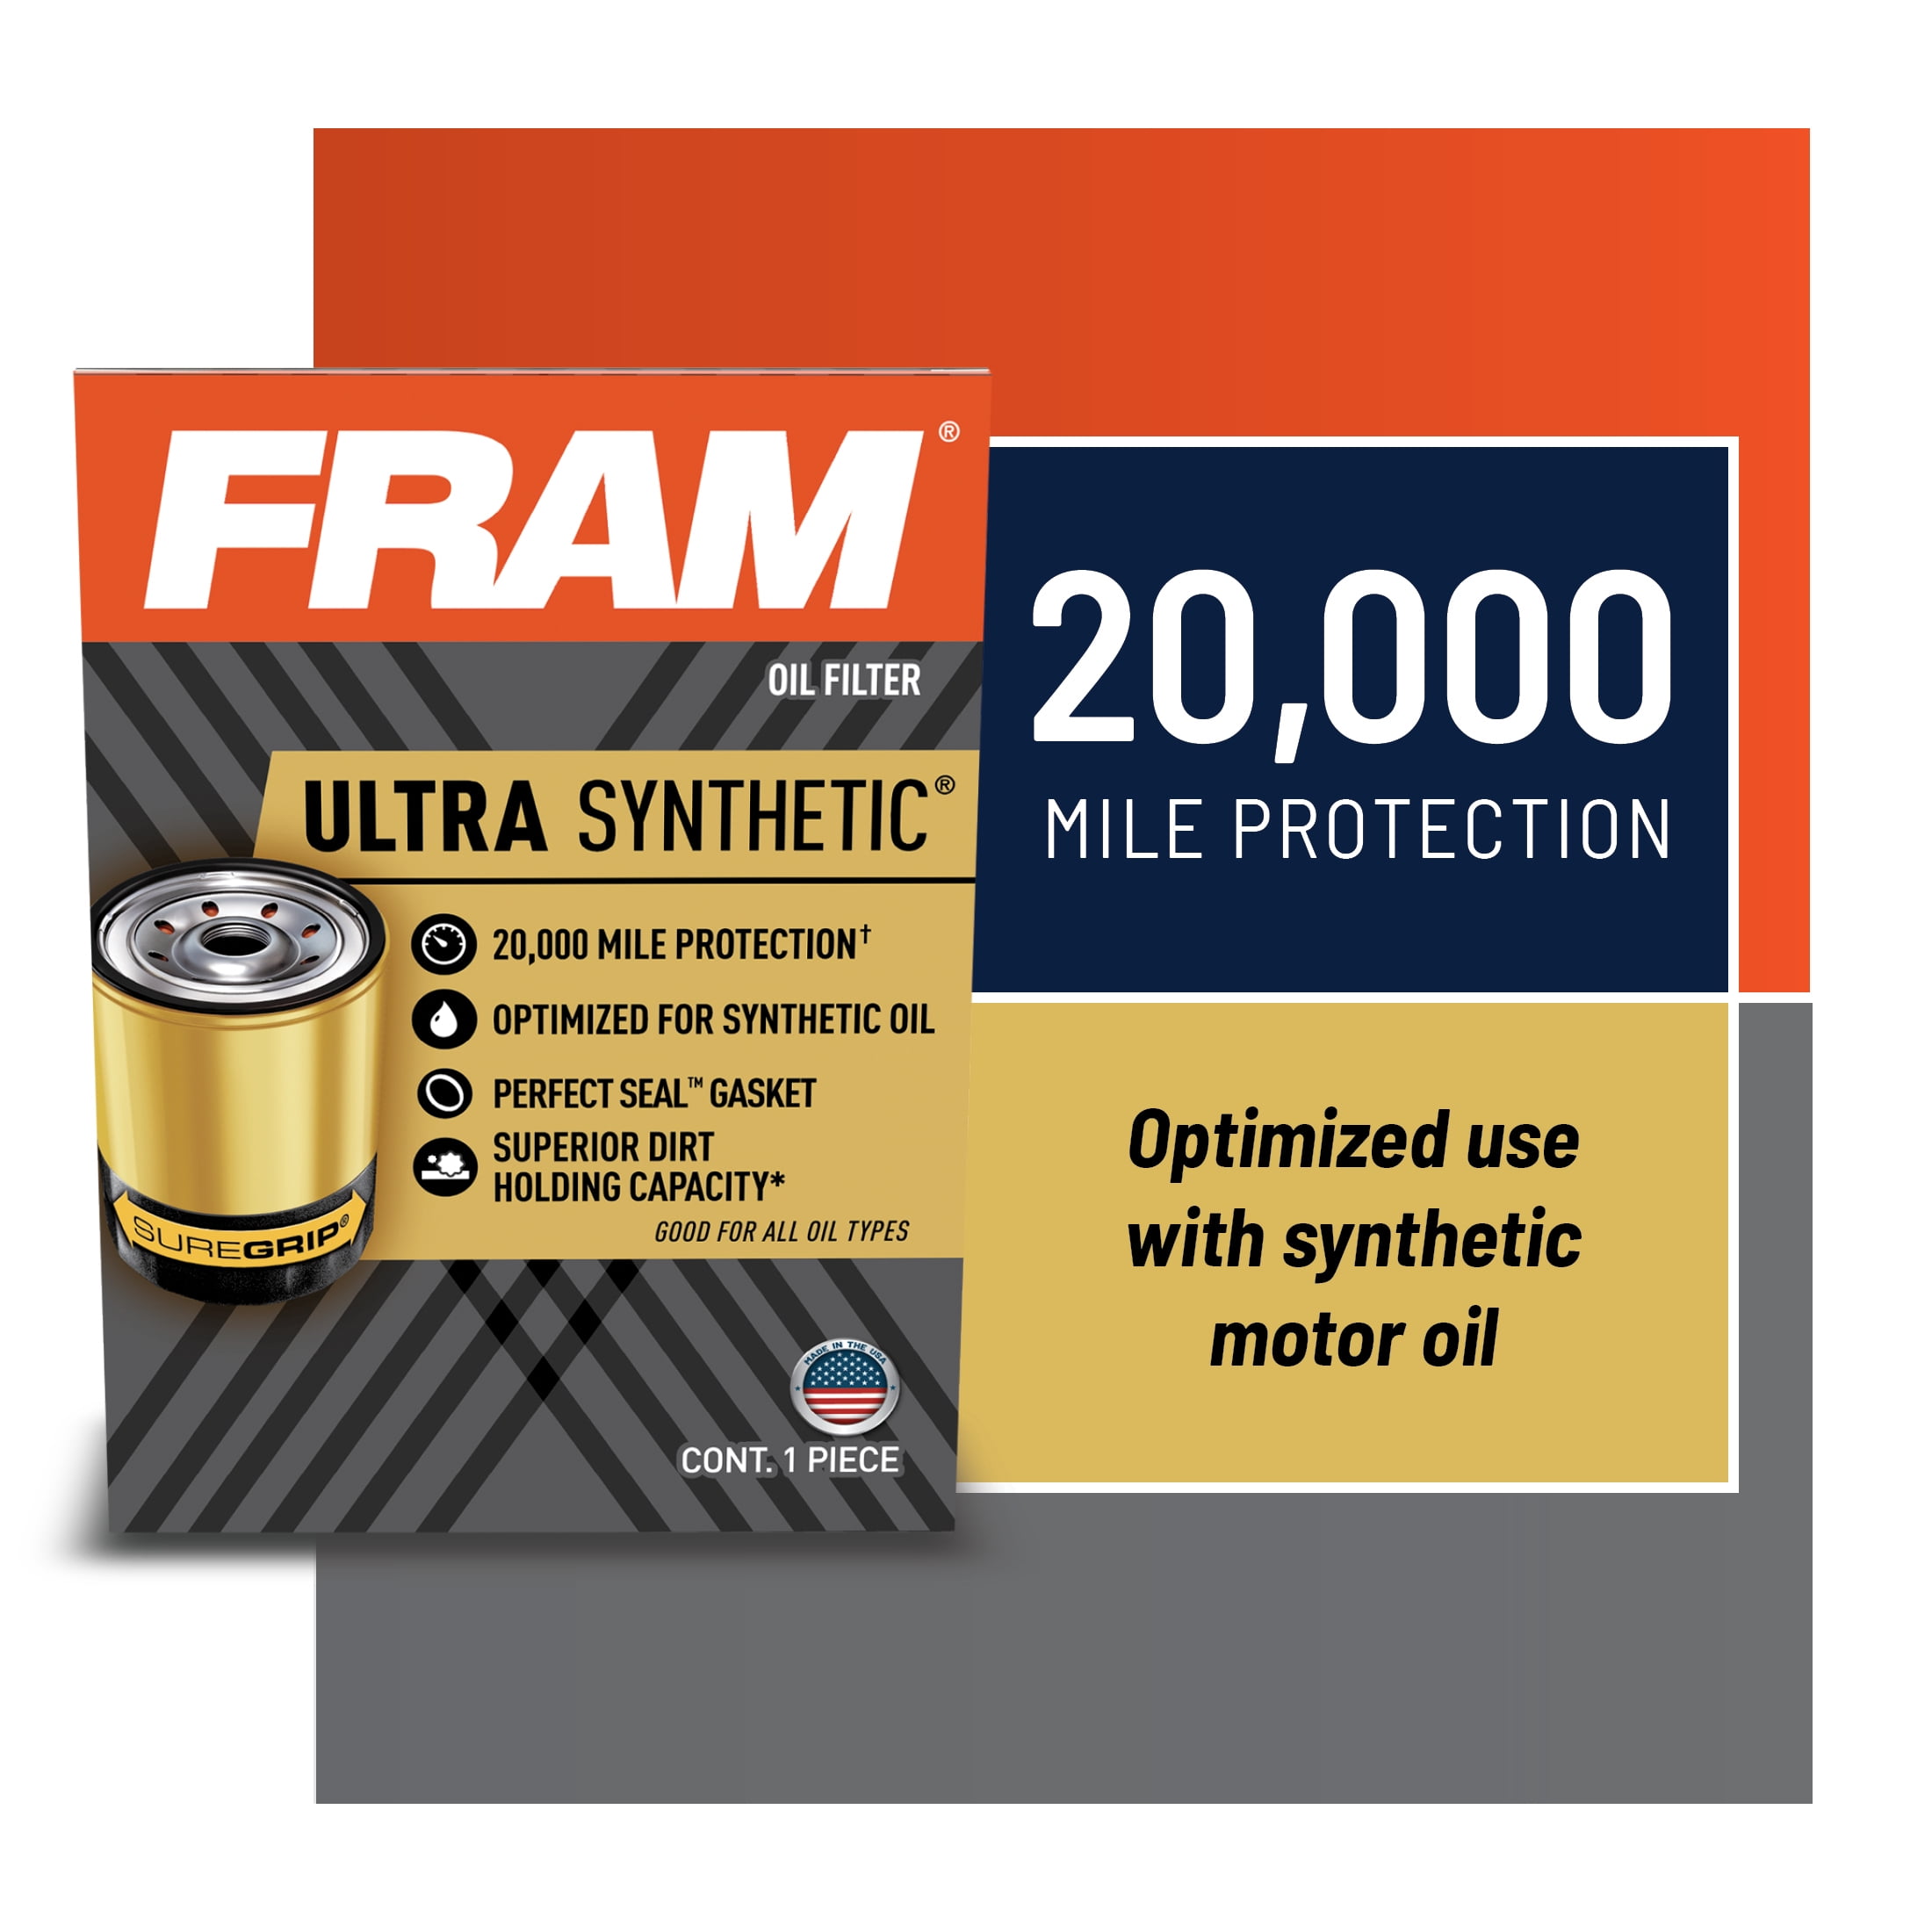 FRAM Ultra Synthetic Oil Filter, XG2870A, 20K mile Filter for Select Audi,  BMW, VW Vehicles Fits select: 1980-2005,2011-2015 VOLKSWAGEN JETTA 